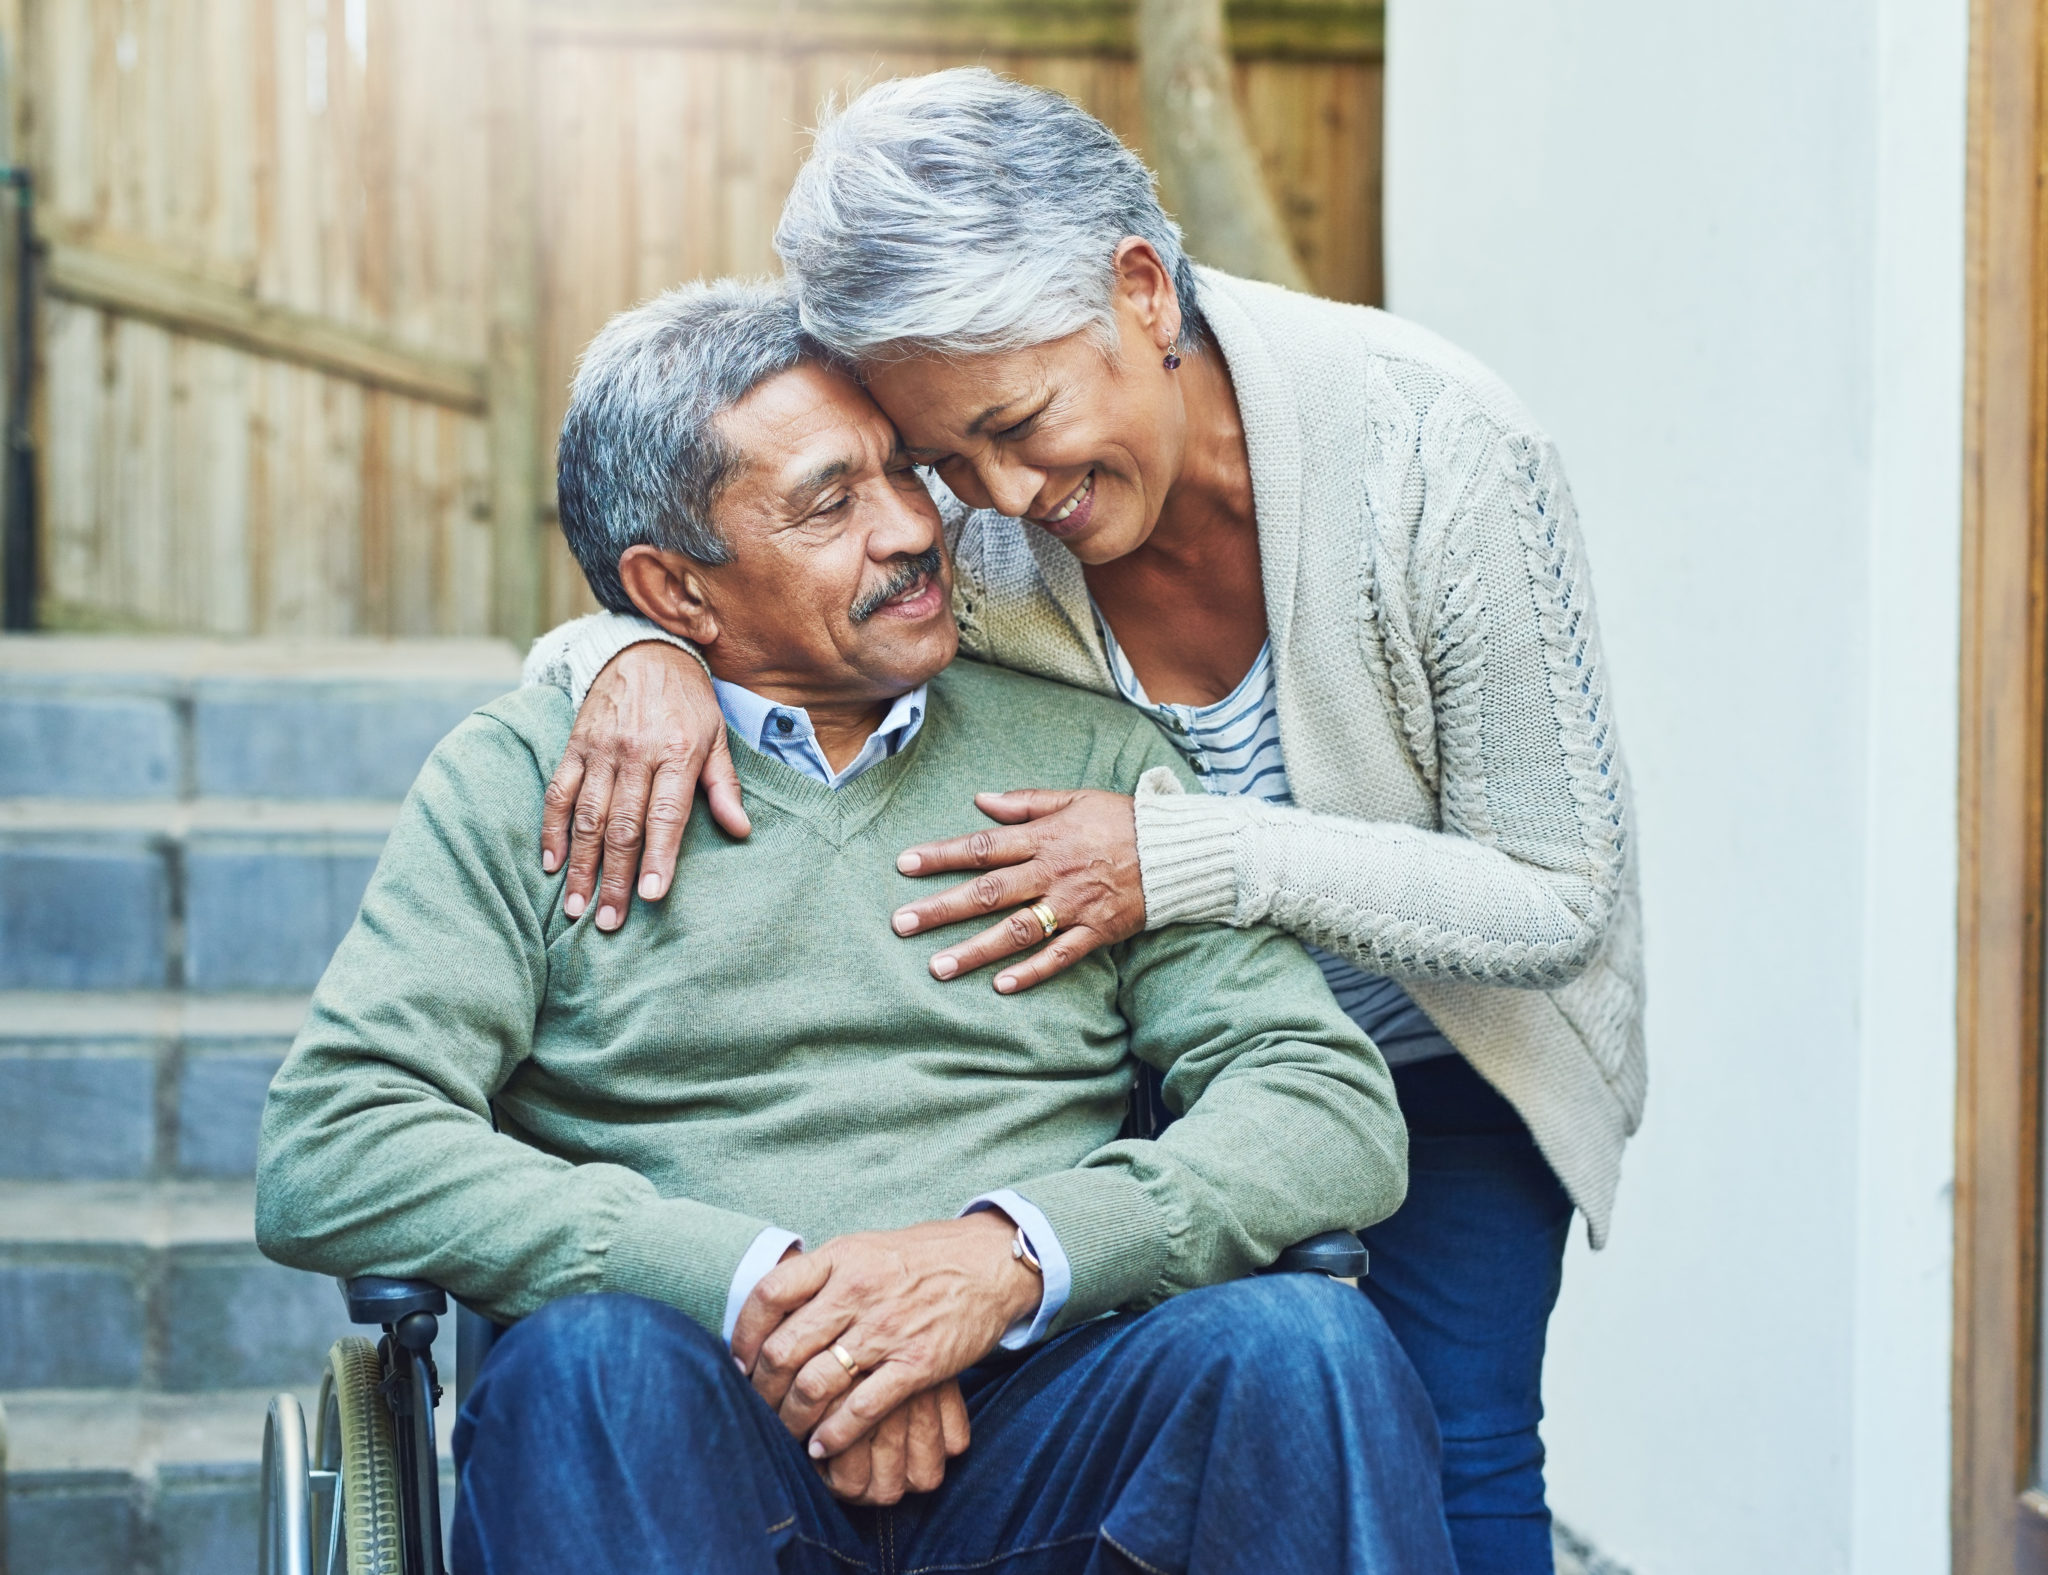 Burdens of spousal caregiving alleviated by appreciation, study finds